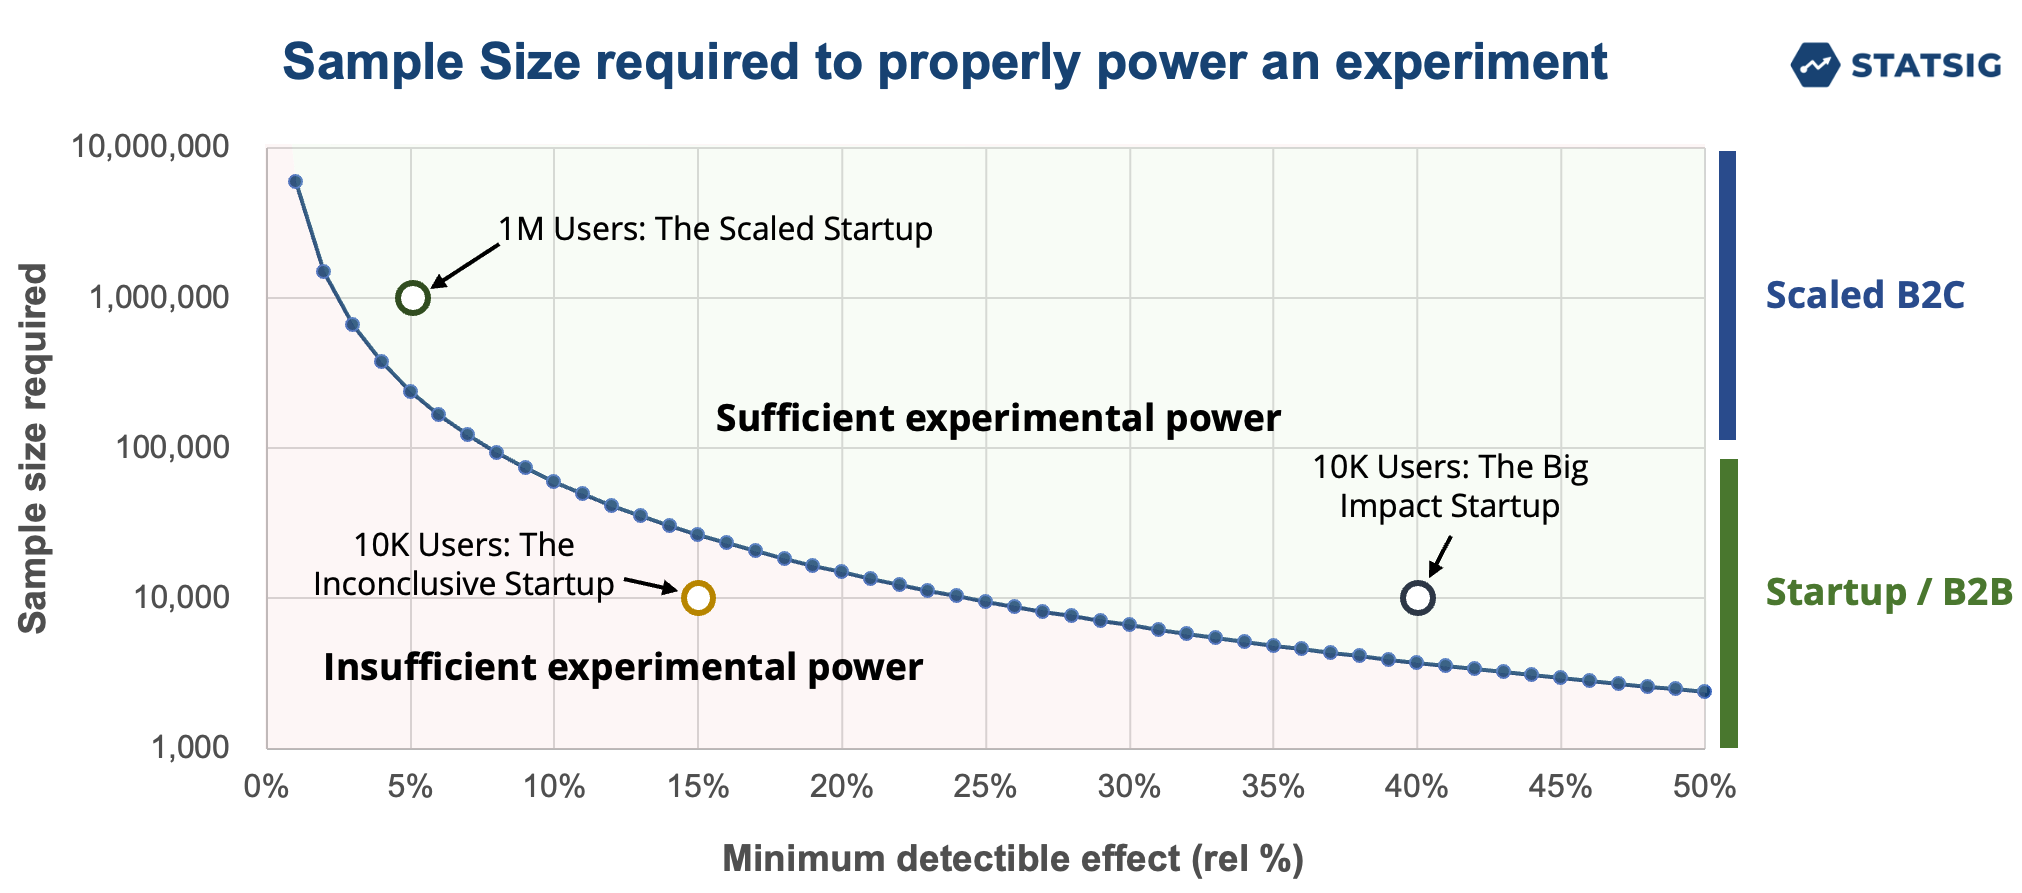 sample size required to properly power an experiment